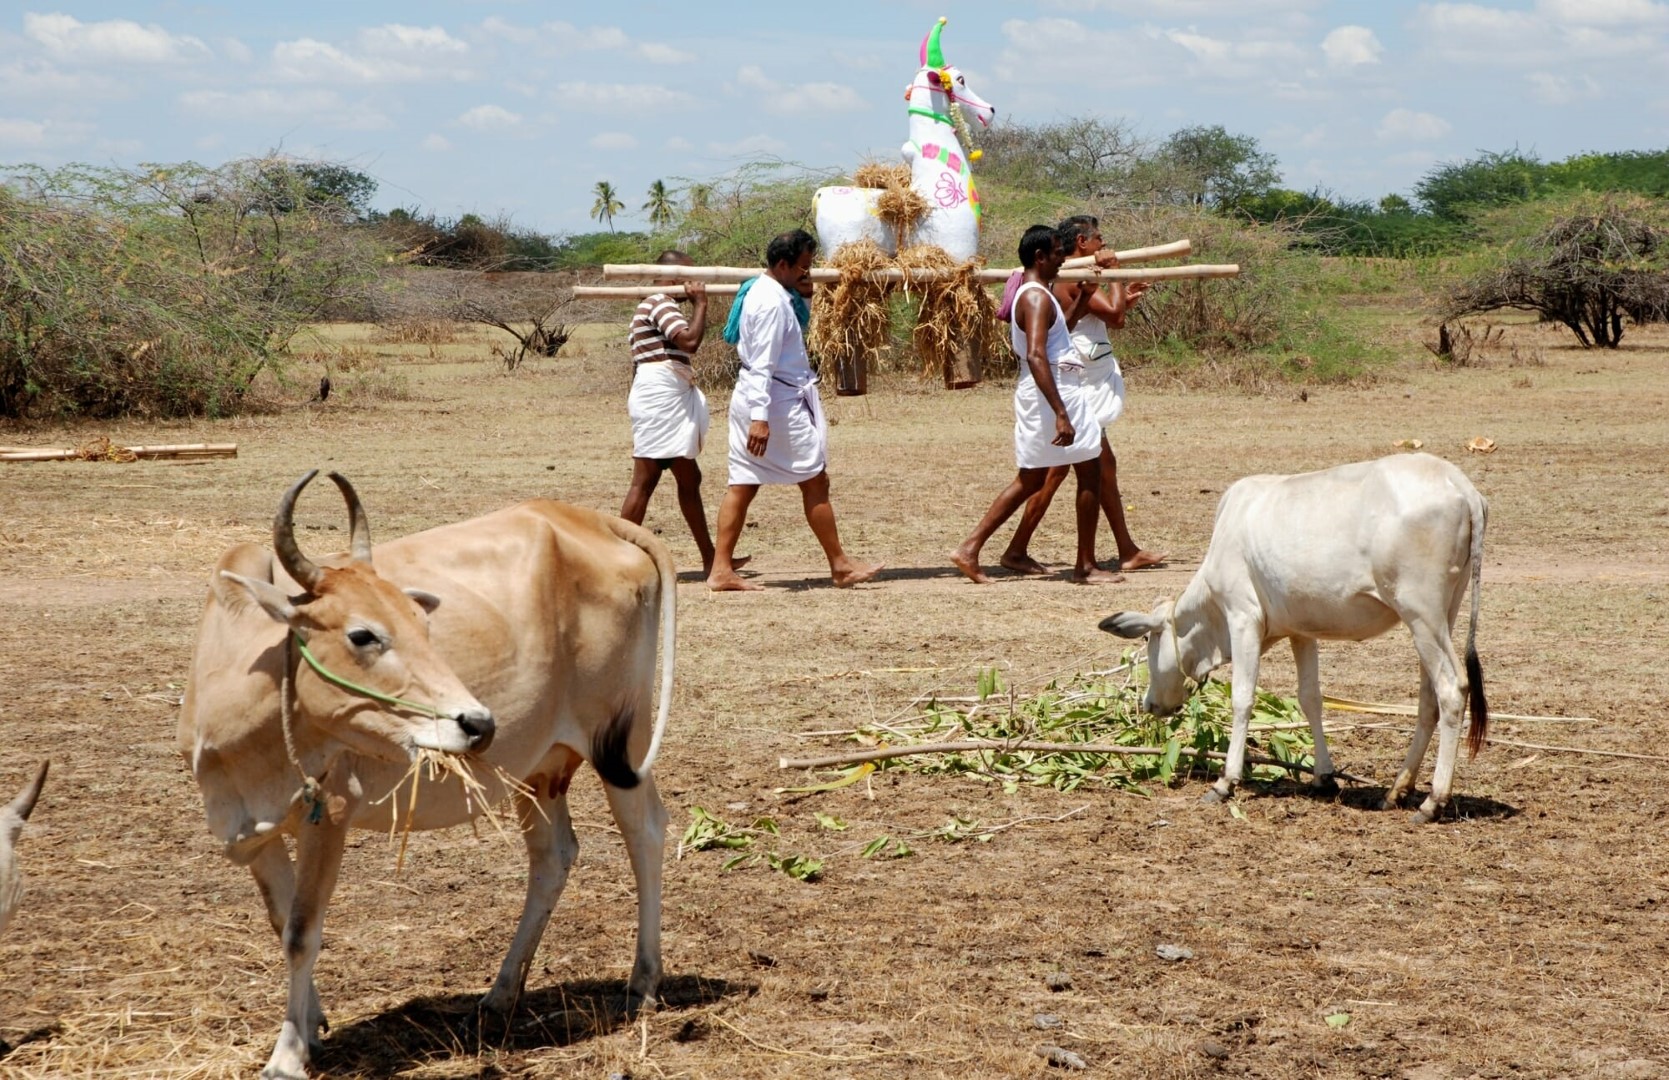 <span style="font-weight:normal;">Four men are needed to carry this cow from the "intermediary grounds" through dried-up pasture land and into the shrine hidden inside a luxuriant sacred grove.</span>